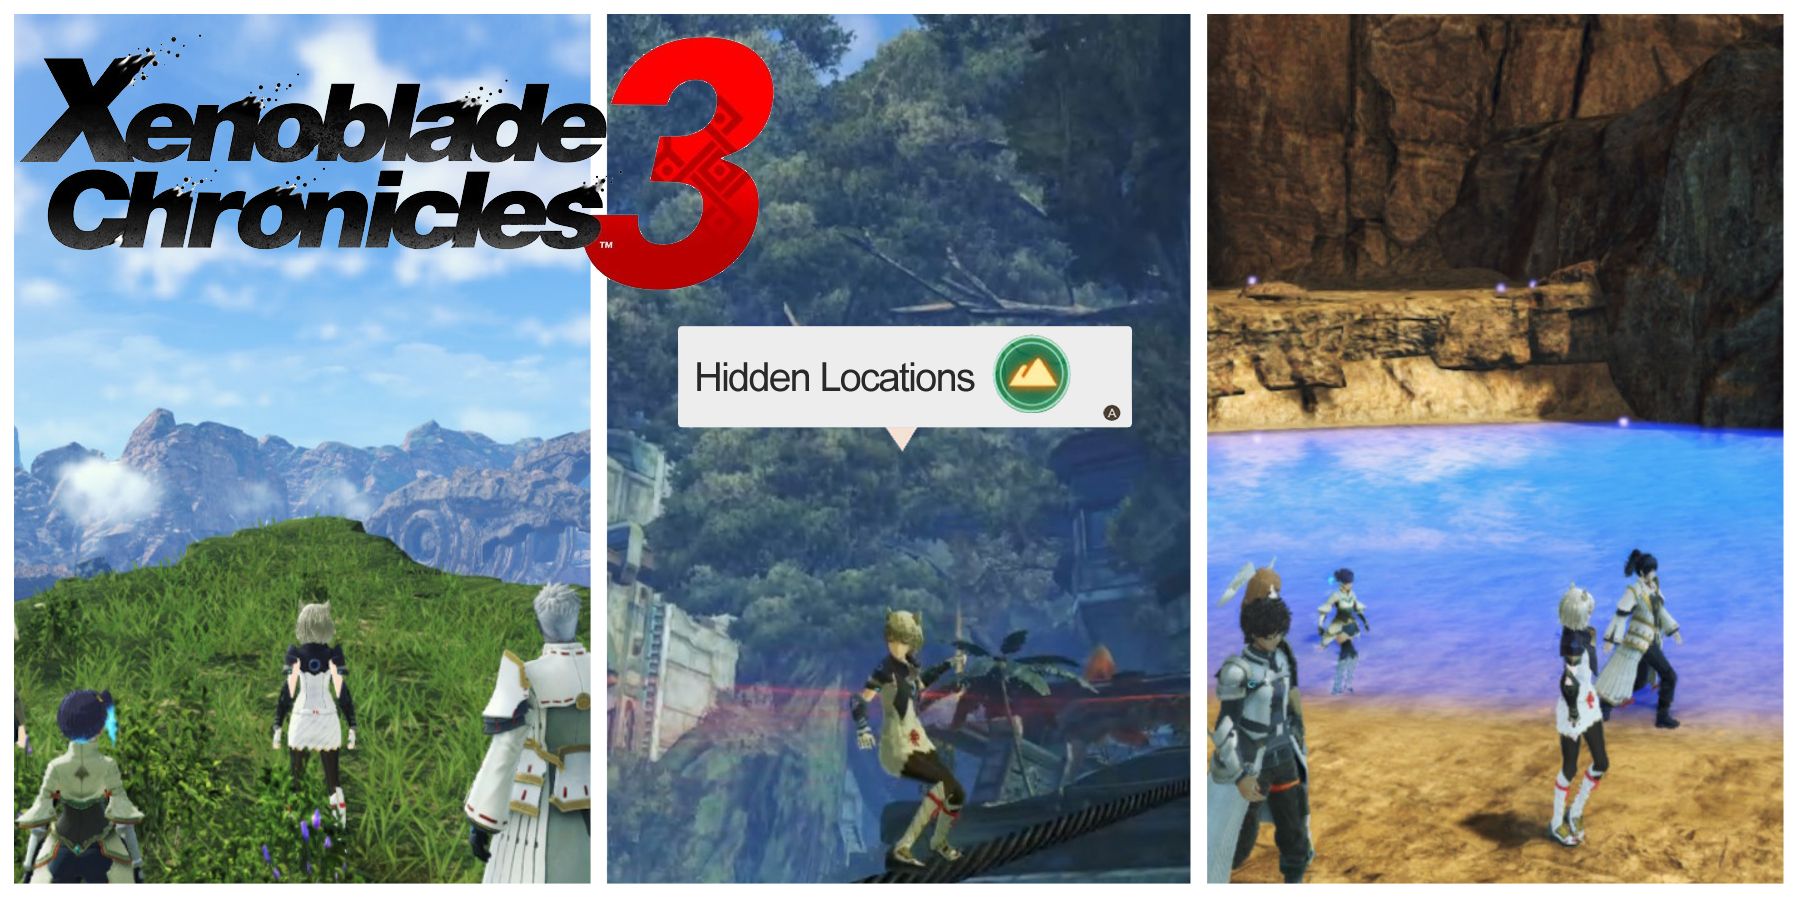 xenoblade chronicles 3 hidden locations feature